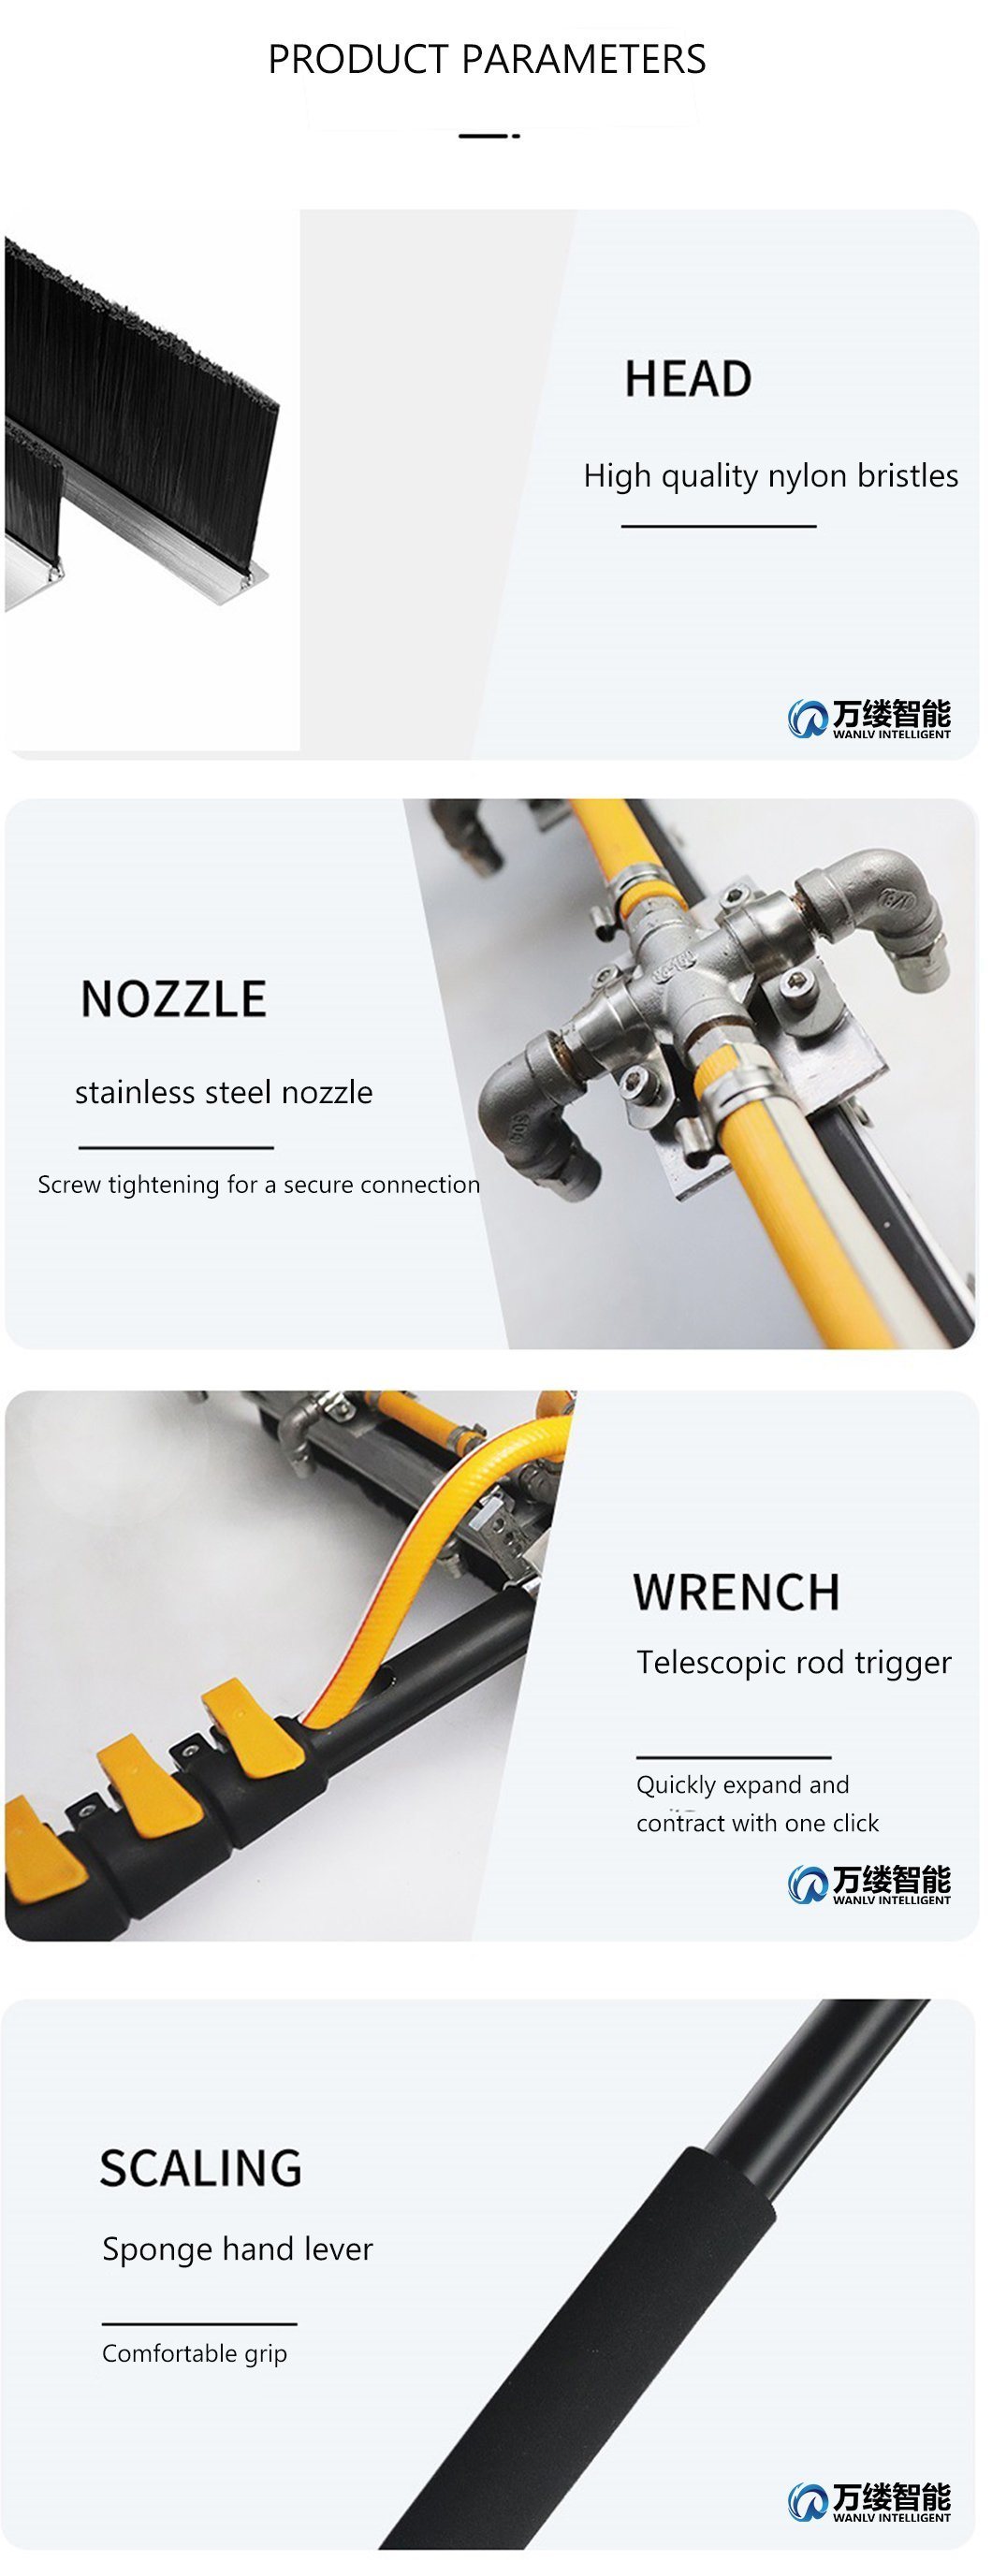 Affordable High-Pressure Spray Brush for Solar Panel Cleaning with 5.5 Meters Telescopic Pole